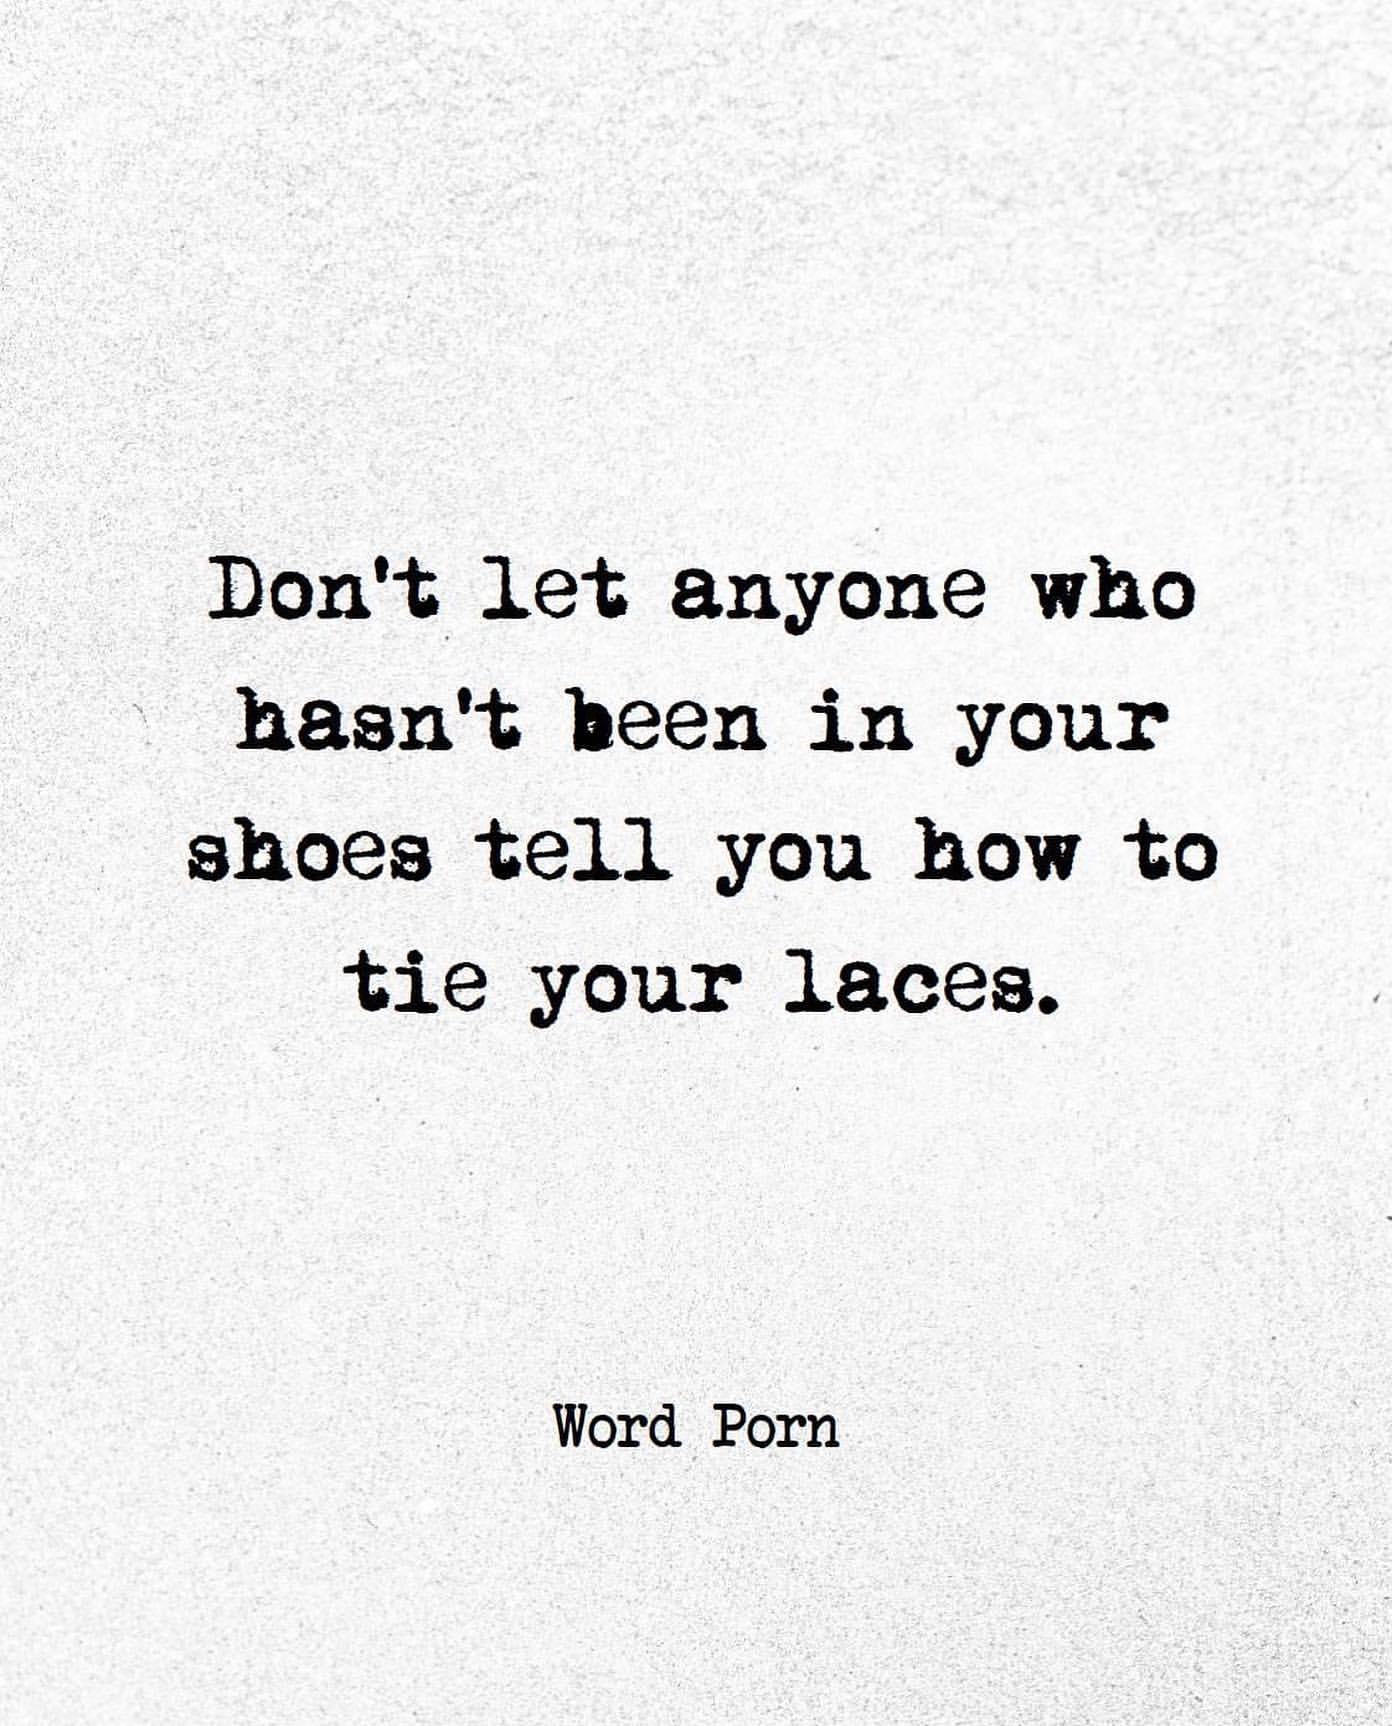 Don't let anyone who hasn't been in your shoes tell you how to tie your laces.